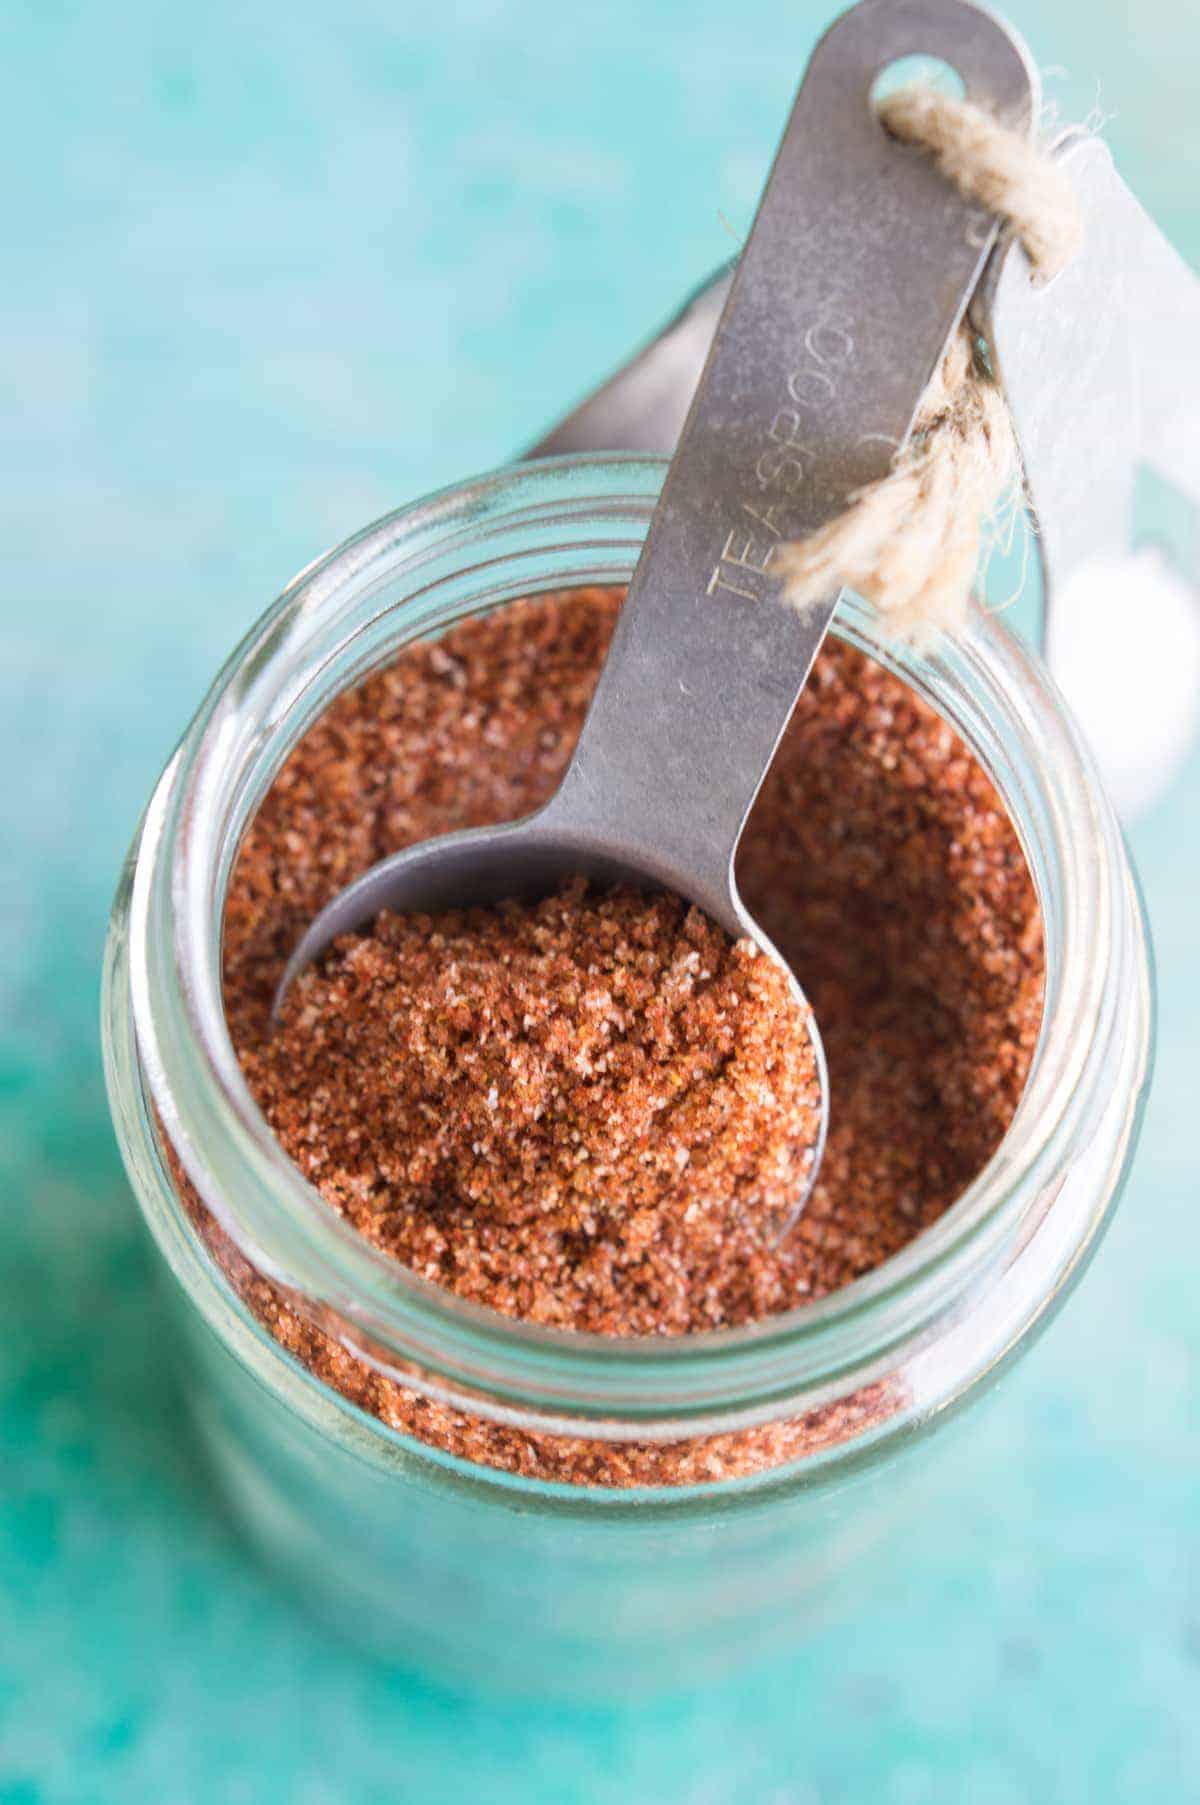 Texas Style BBQ Dry Rub. This sweet and spicy dry rub is perfect for all your grilling and BBQ needs! The sweet brown sugar mingled with the spicy chili powder gives the best of both worlds. This rub is perfect for steaks, chicken, pork, anything you desire!